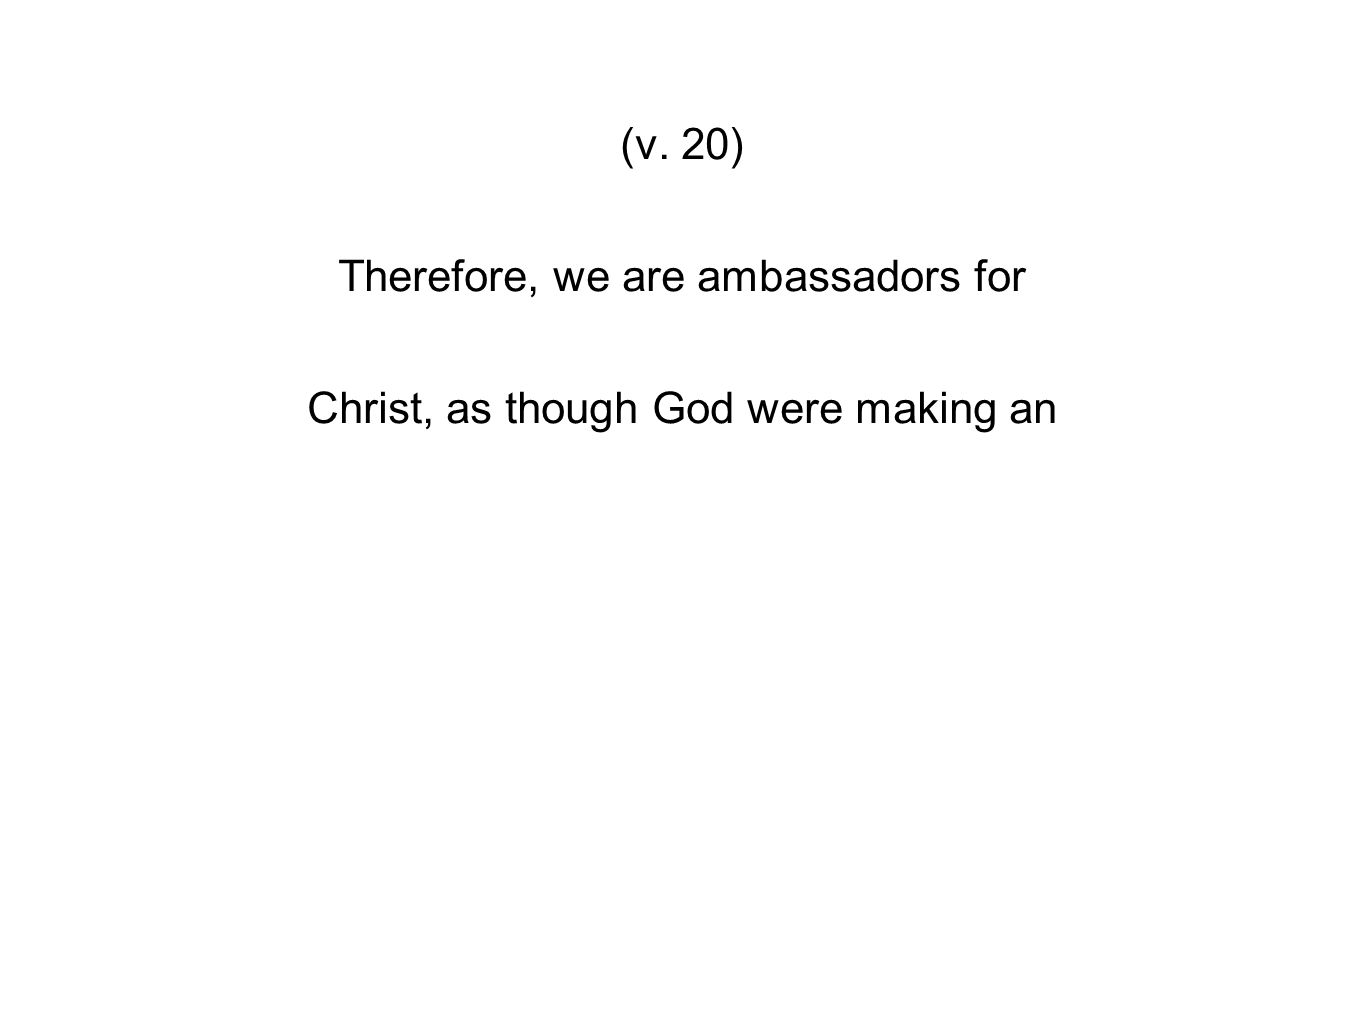 (v. 20) Therefore, we are ambassadors for Christ, as though God were making an